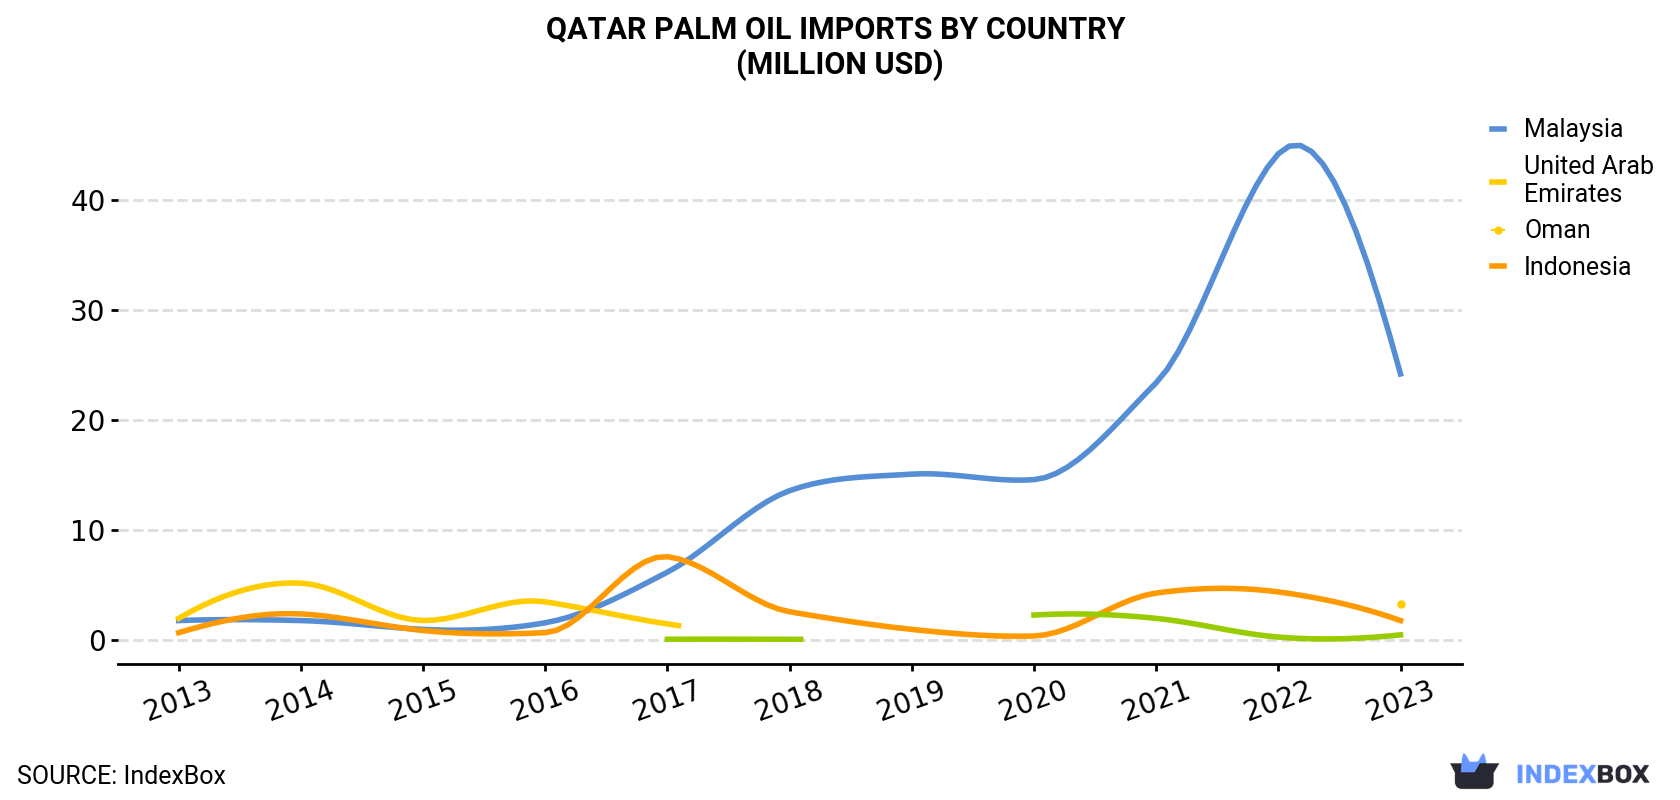 Qatar Palm Oil Imports By Country (Million USD)